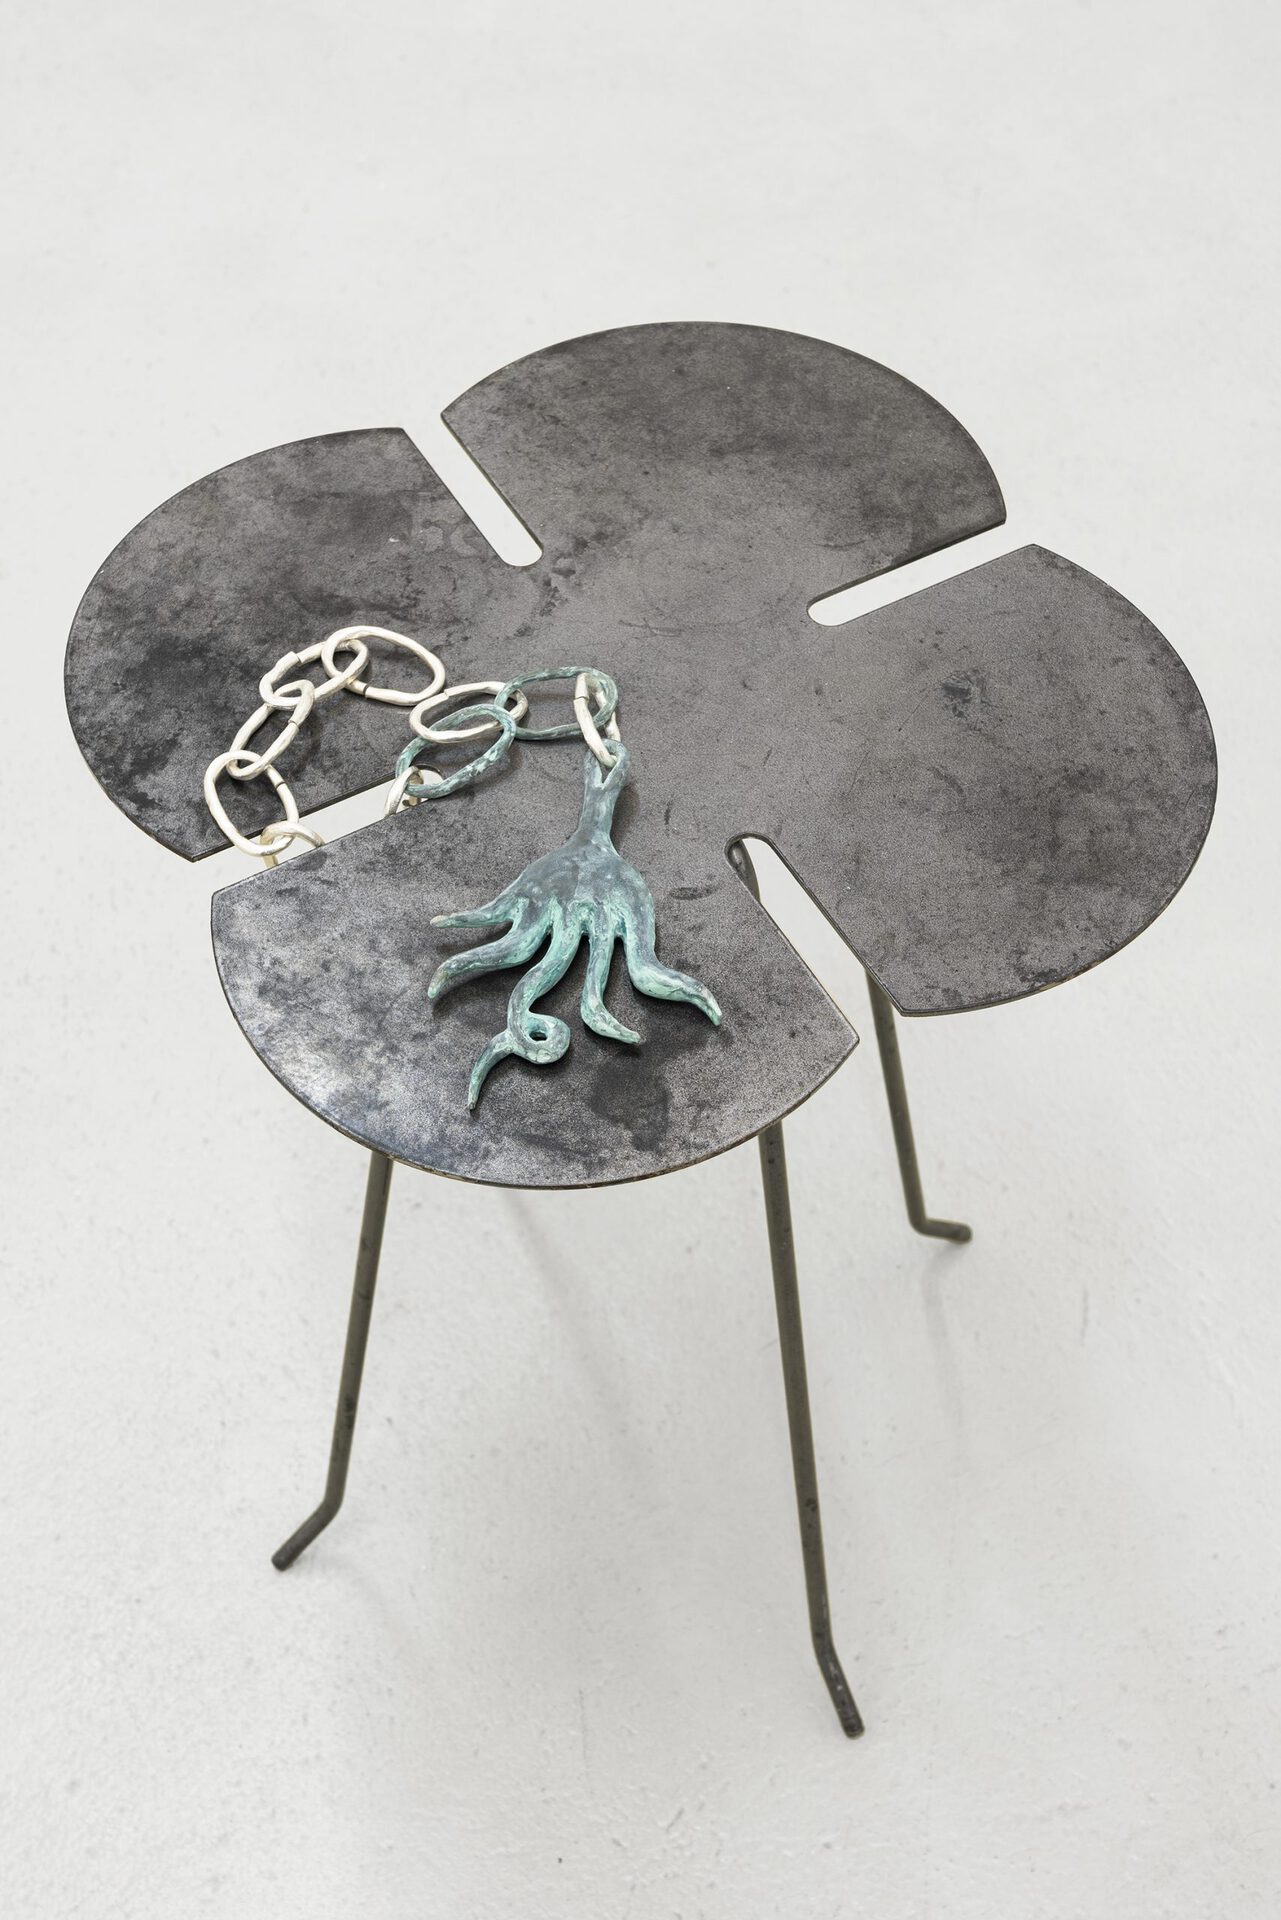 Marie-Michelle Deschamps, I See / You Mean, 2022 found steel table patinated bronze, sterling silver 53 cm x 43 cm x 43 cm